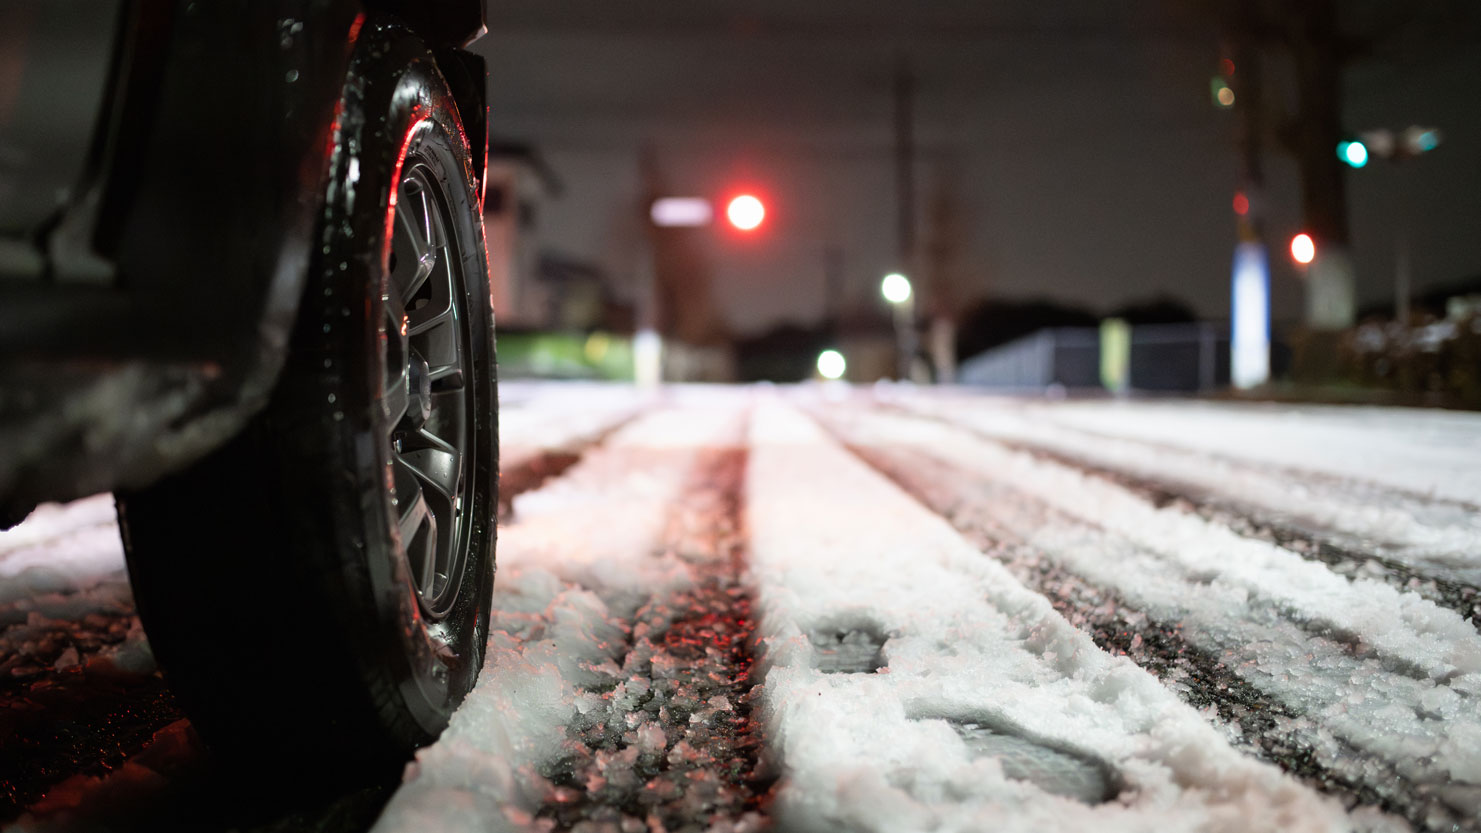 Close-up of the tyre of a car on a snow-covered road. Dusky surroundings, occasional lights visible in the background.